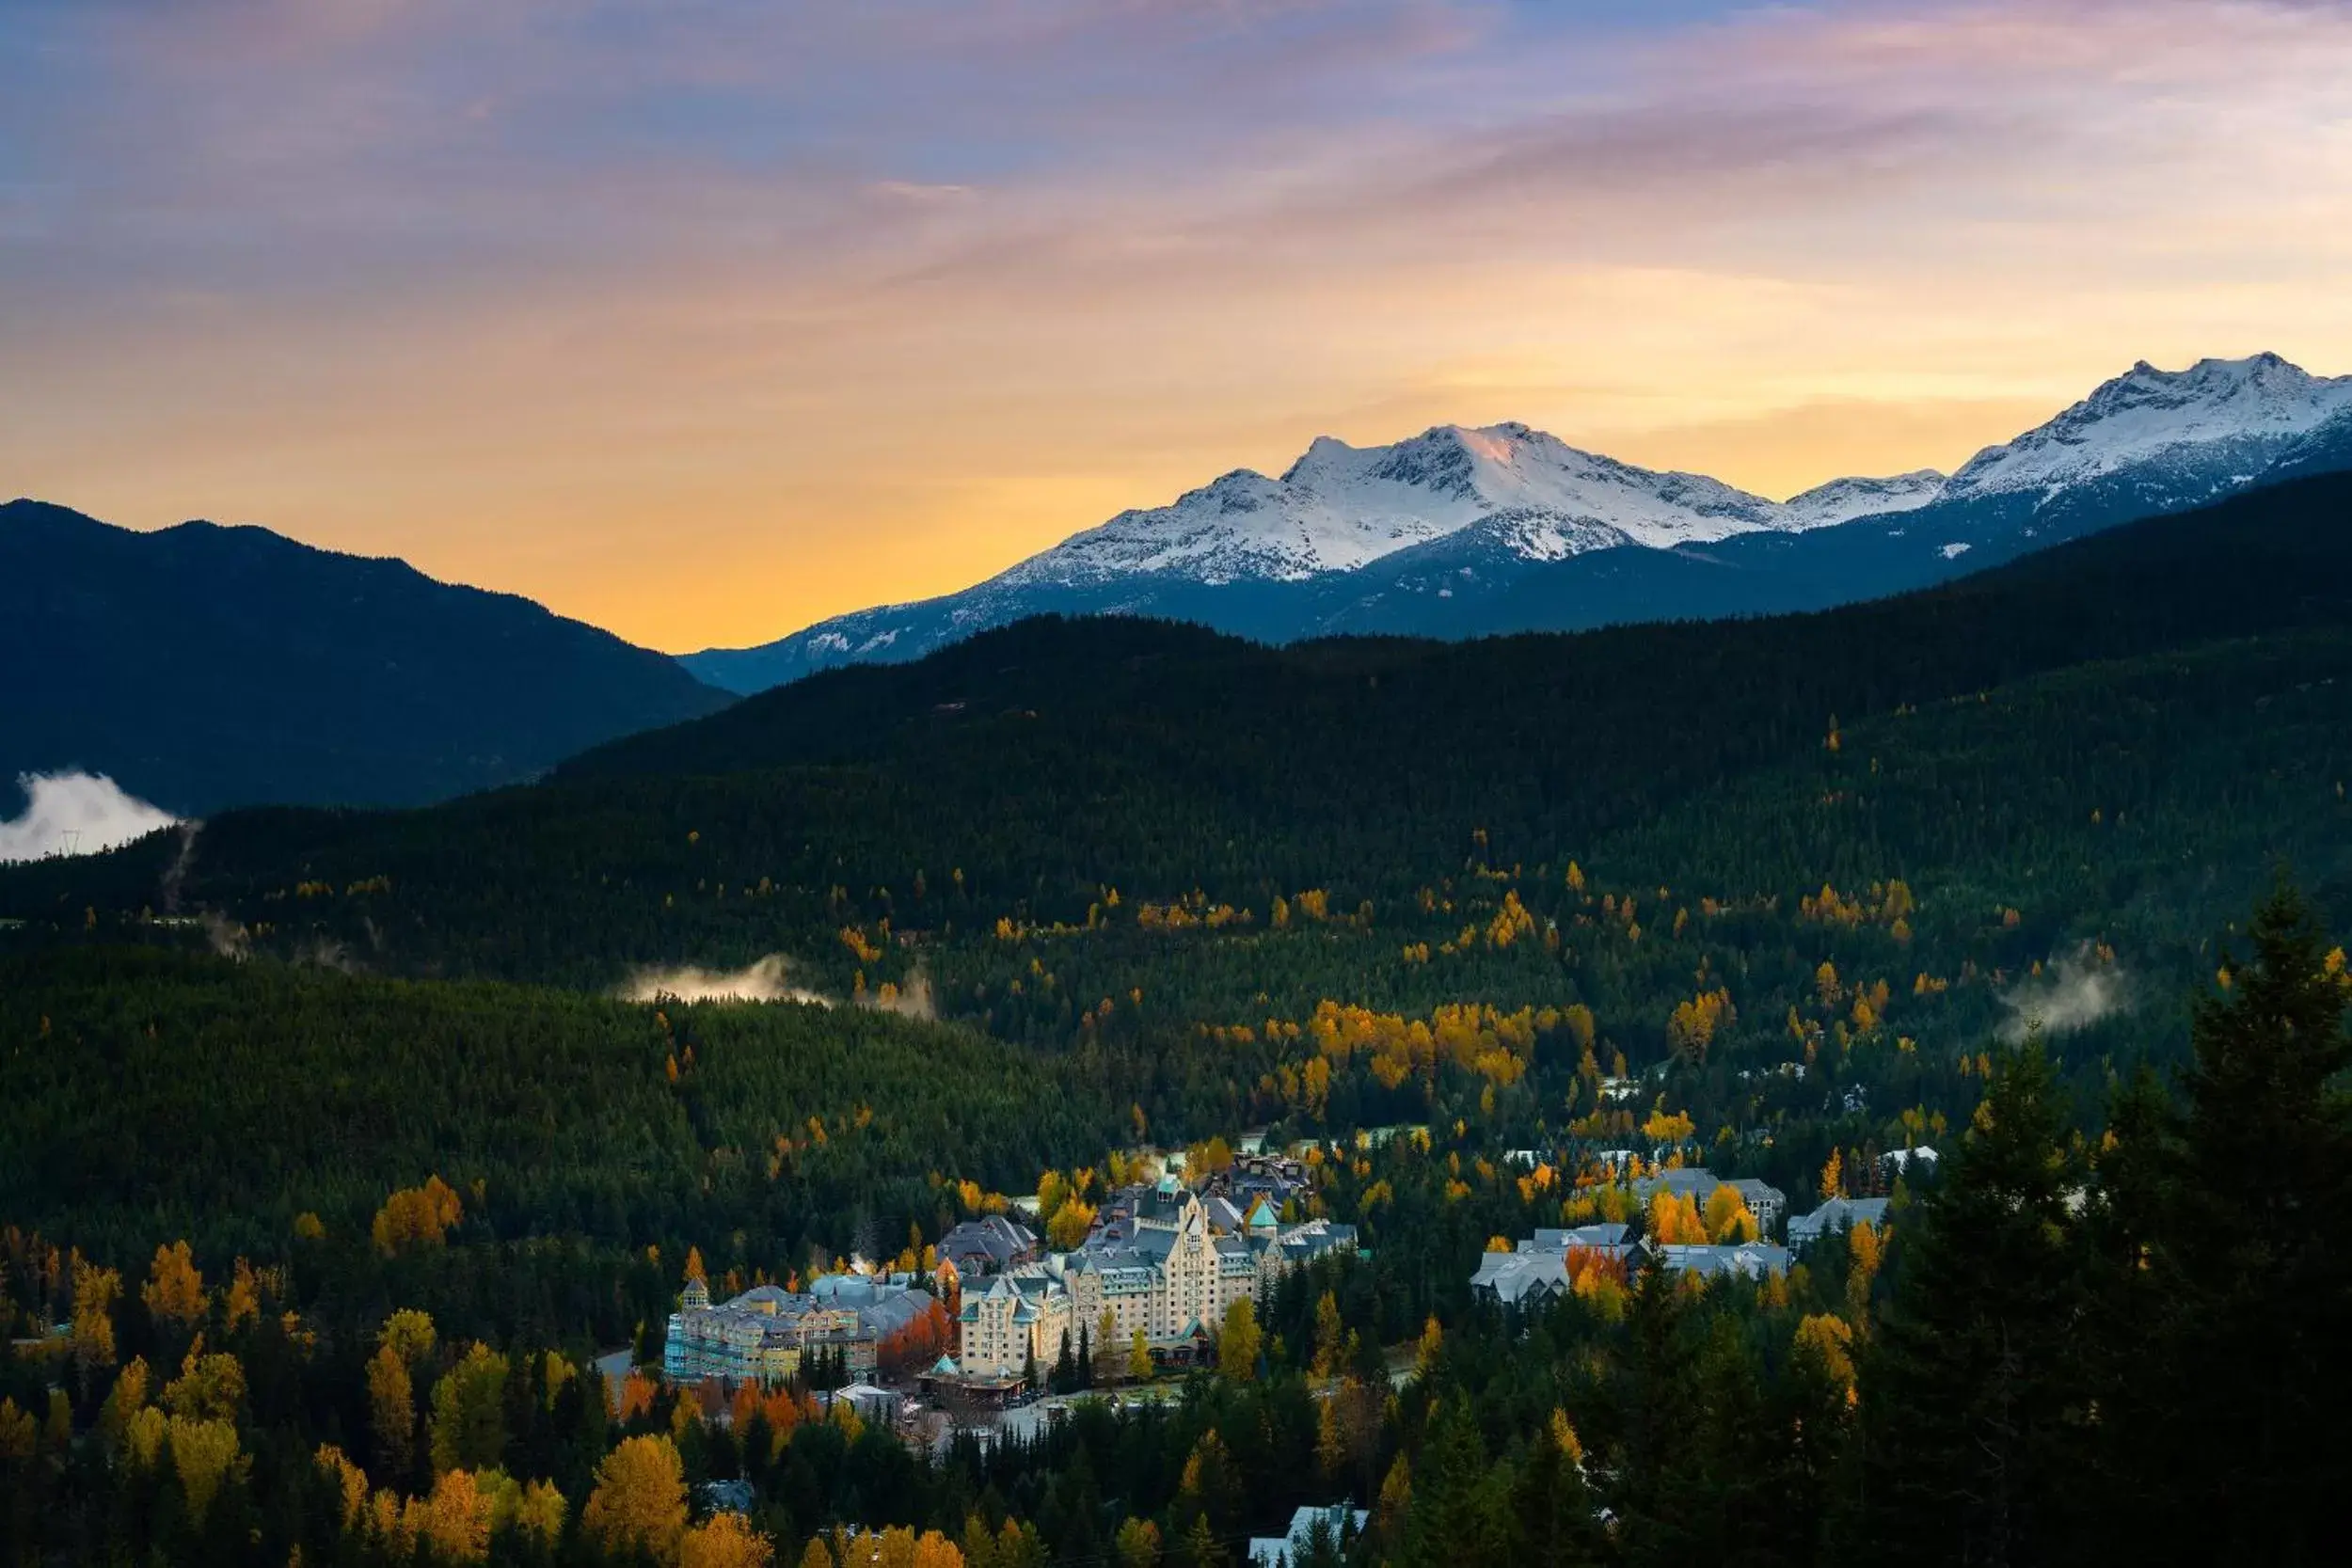 Property building in Fairmont Chateau Whistler